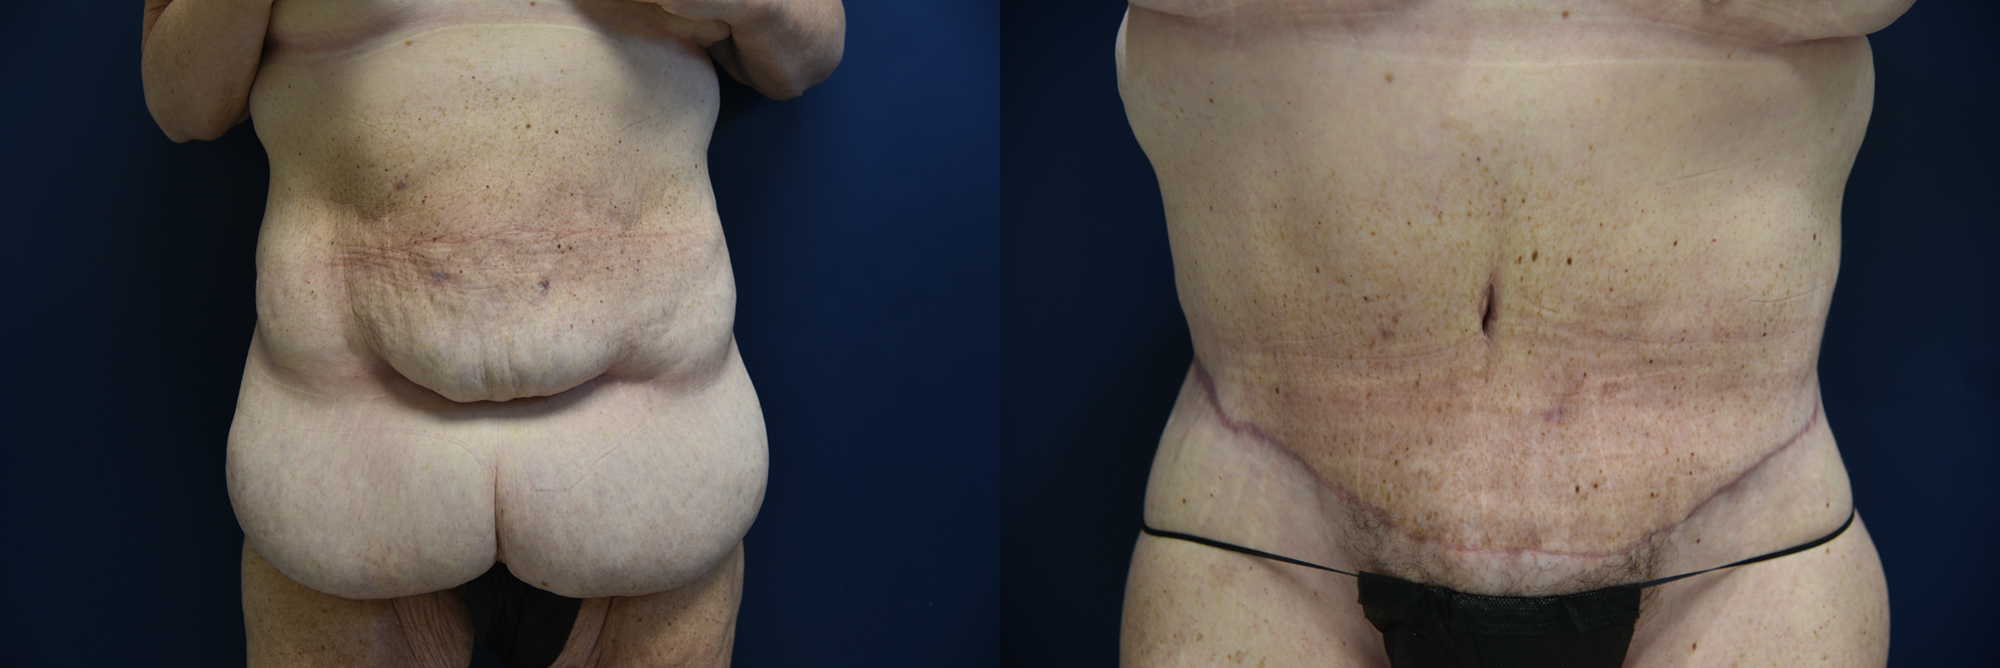 Body Lift after Major Weight Loss Before and After Photo by Dr. Leveque of Gulf Coast Plastic Surgery in Pensacola, FL